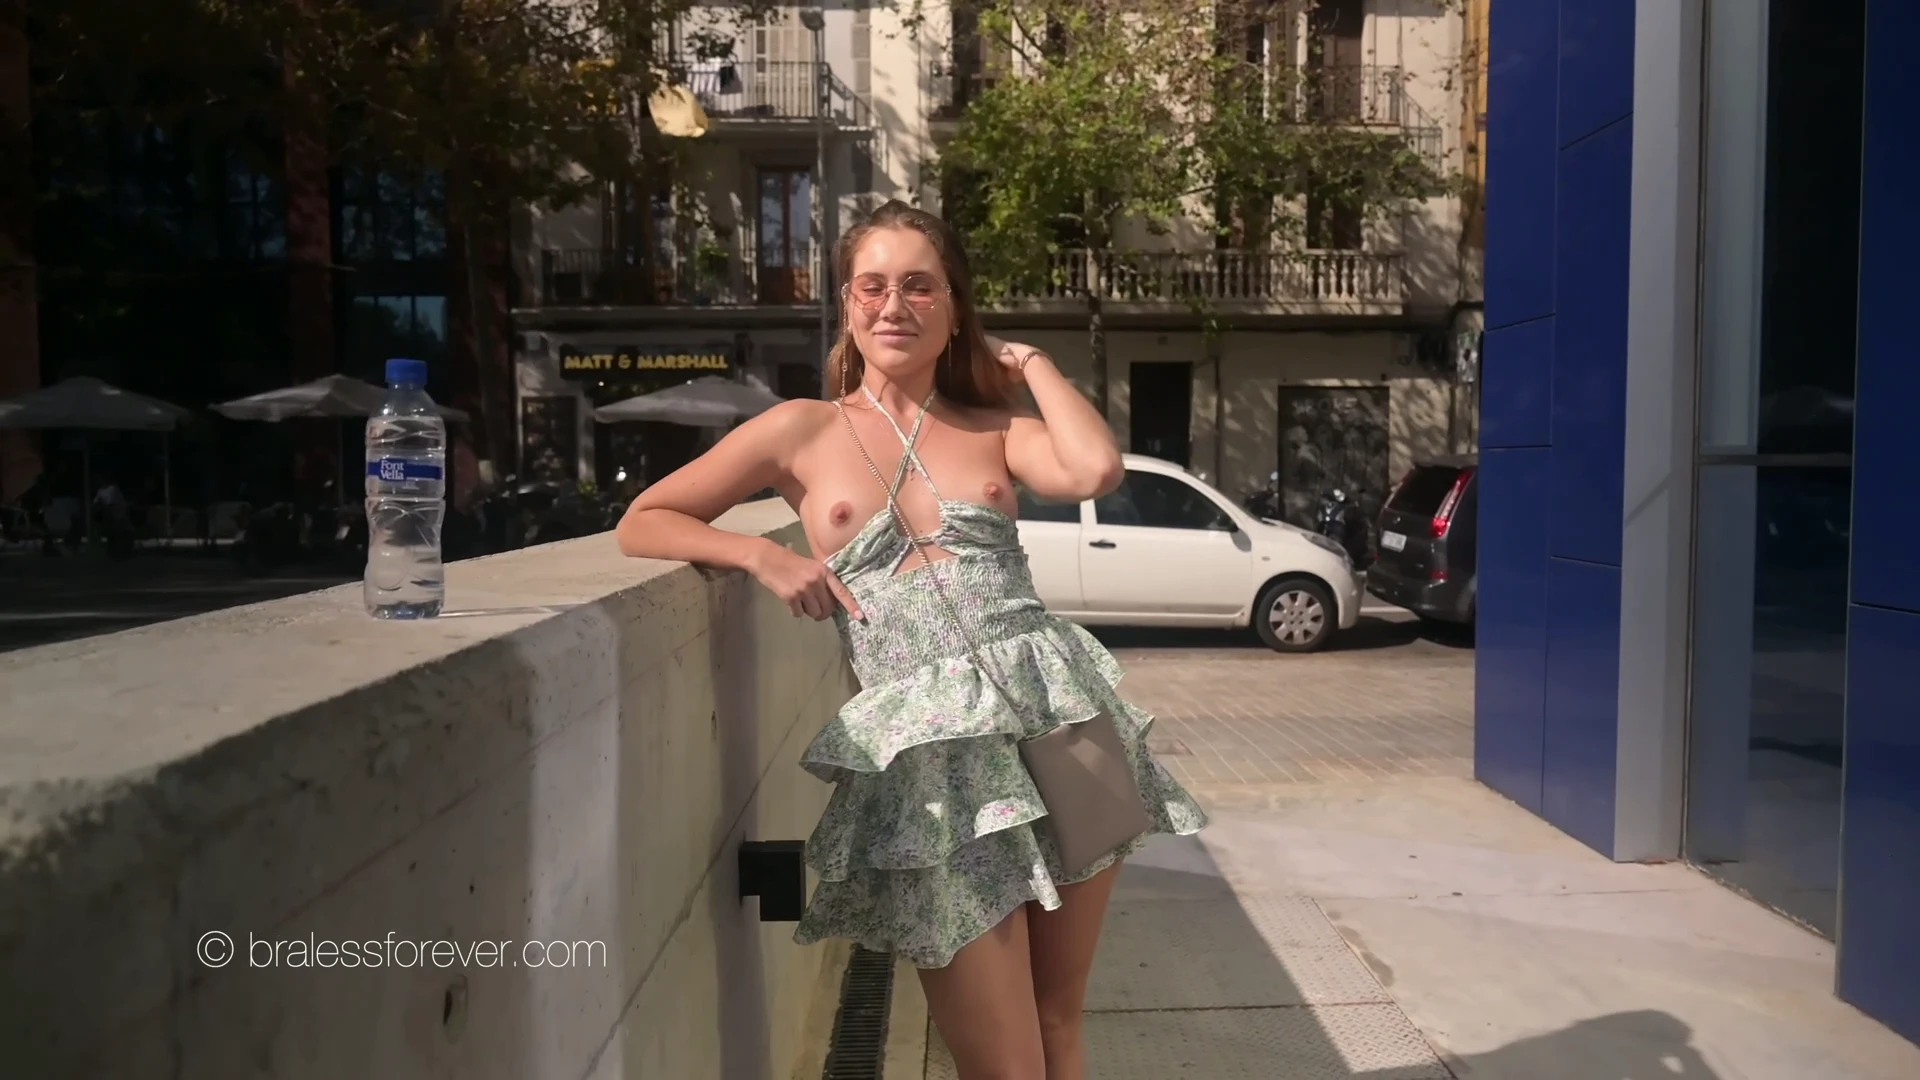 Mary flashing in public.. Full 30min vid can be seen on BralessForever!